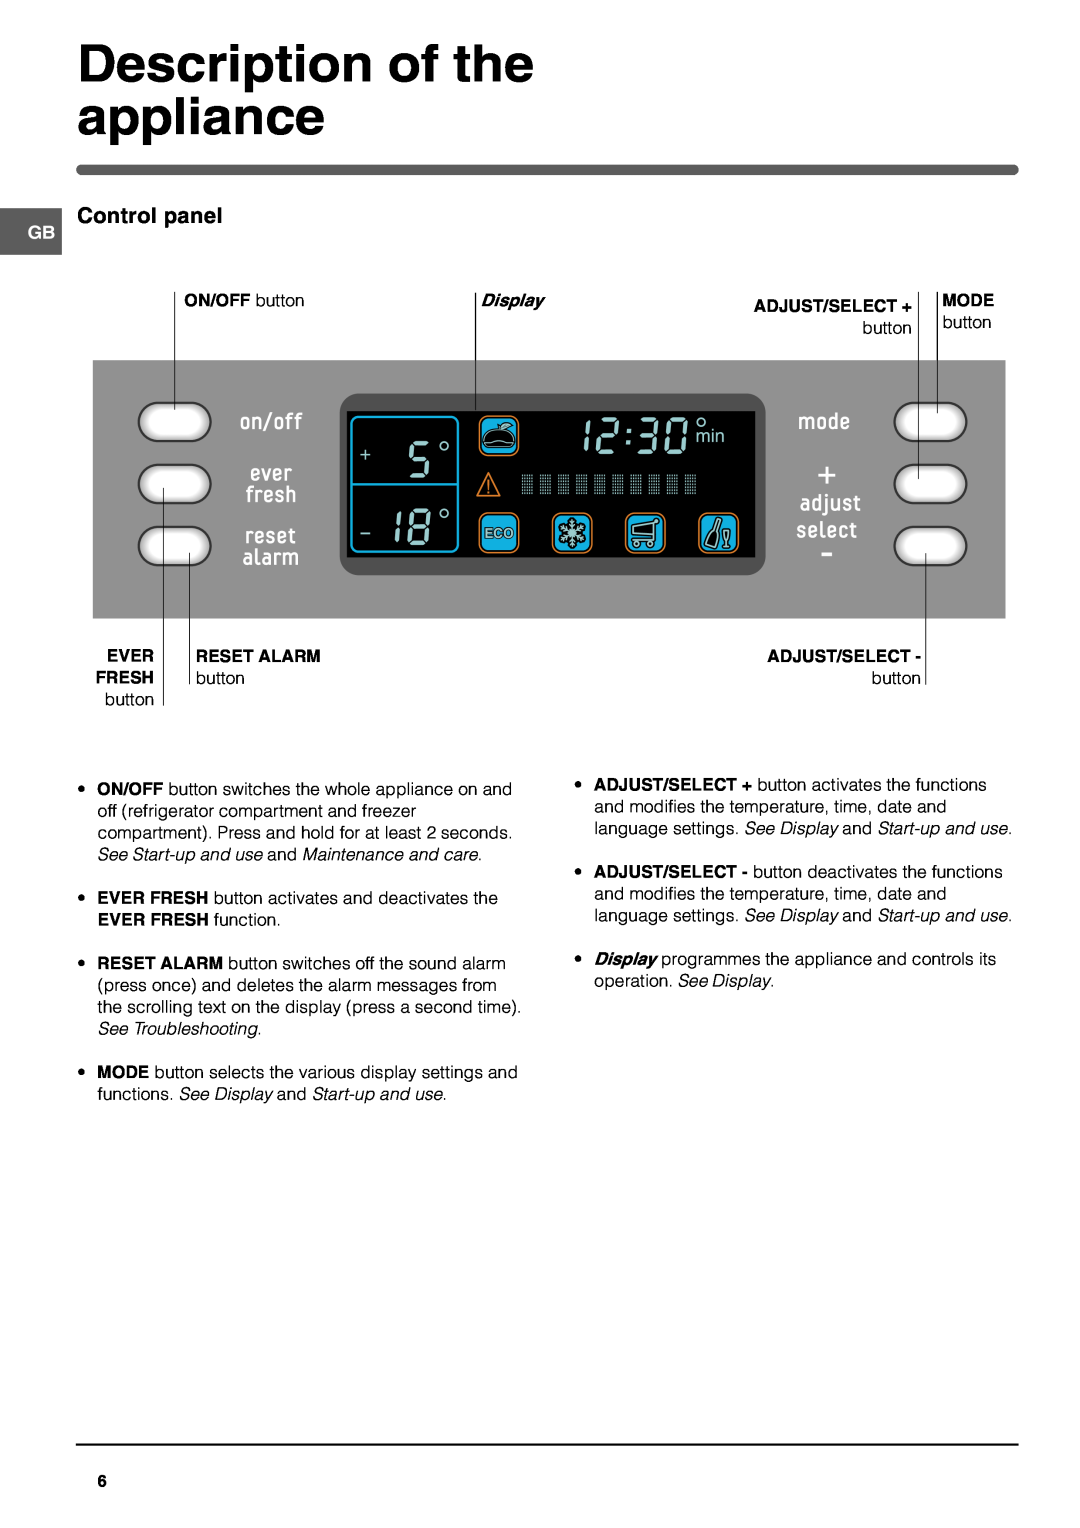 Hotpoint FFL49 Description of the appliance, ON/OFF button, Display, Mode, Ever Fresh, Reset Alarm, EVER FRESH function 